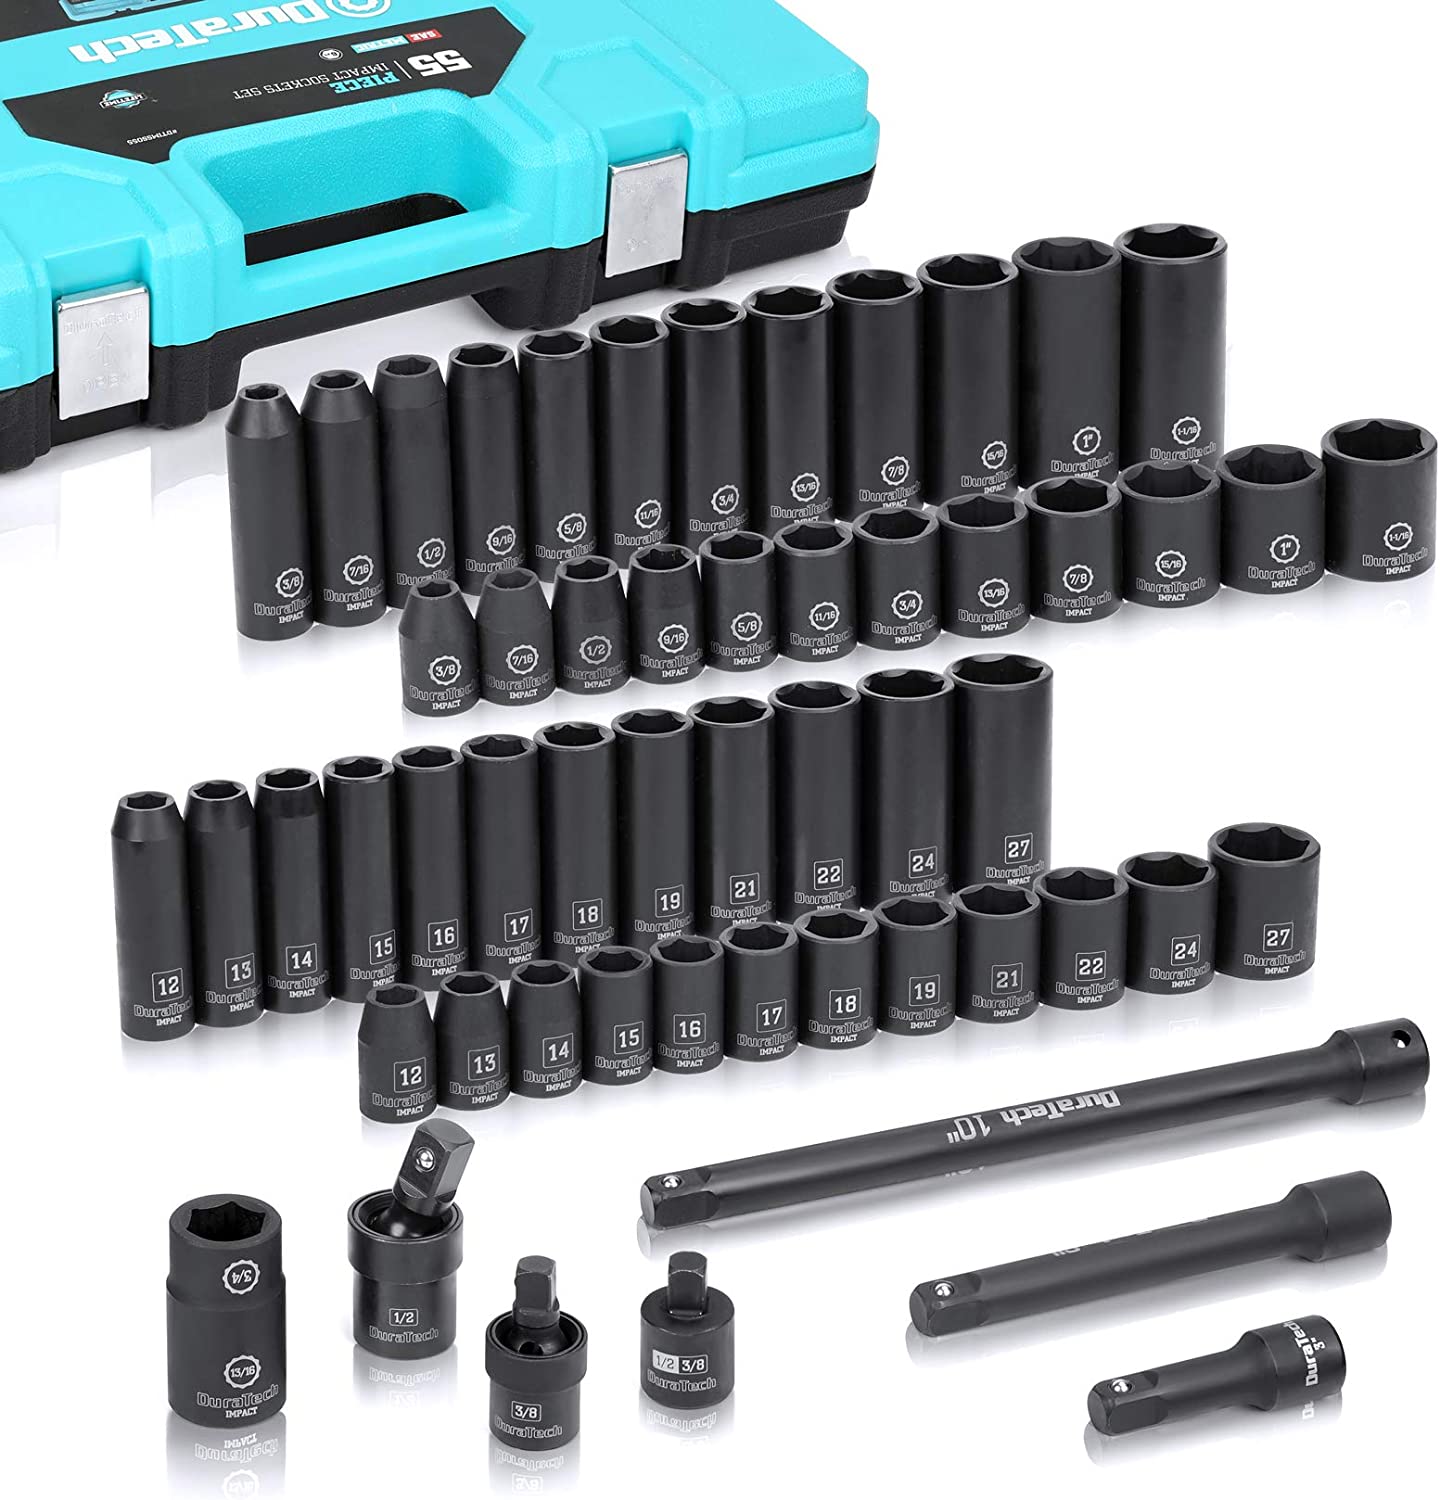 DURATECH 55-Piece Socket Set, 1/2''  Point Impact Socket Set,  Accessories Included, 24 Both Standard Impact Sockets and Deep Impact  Sockets in SAE (3/8'' to 1-1/16'')  Metric (12 to 27mm)